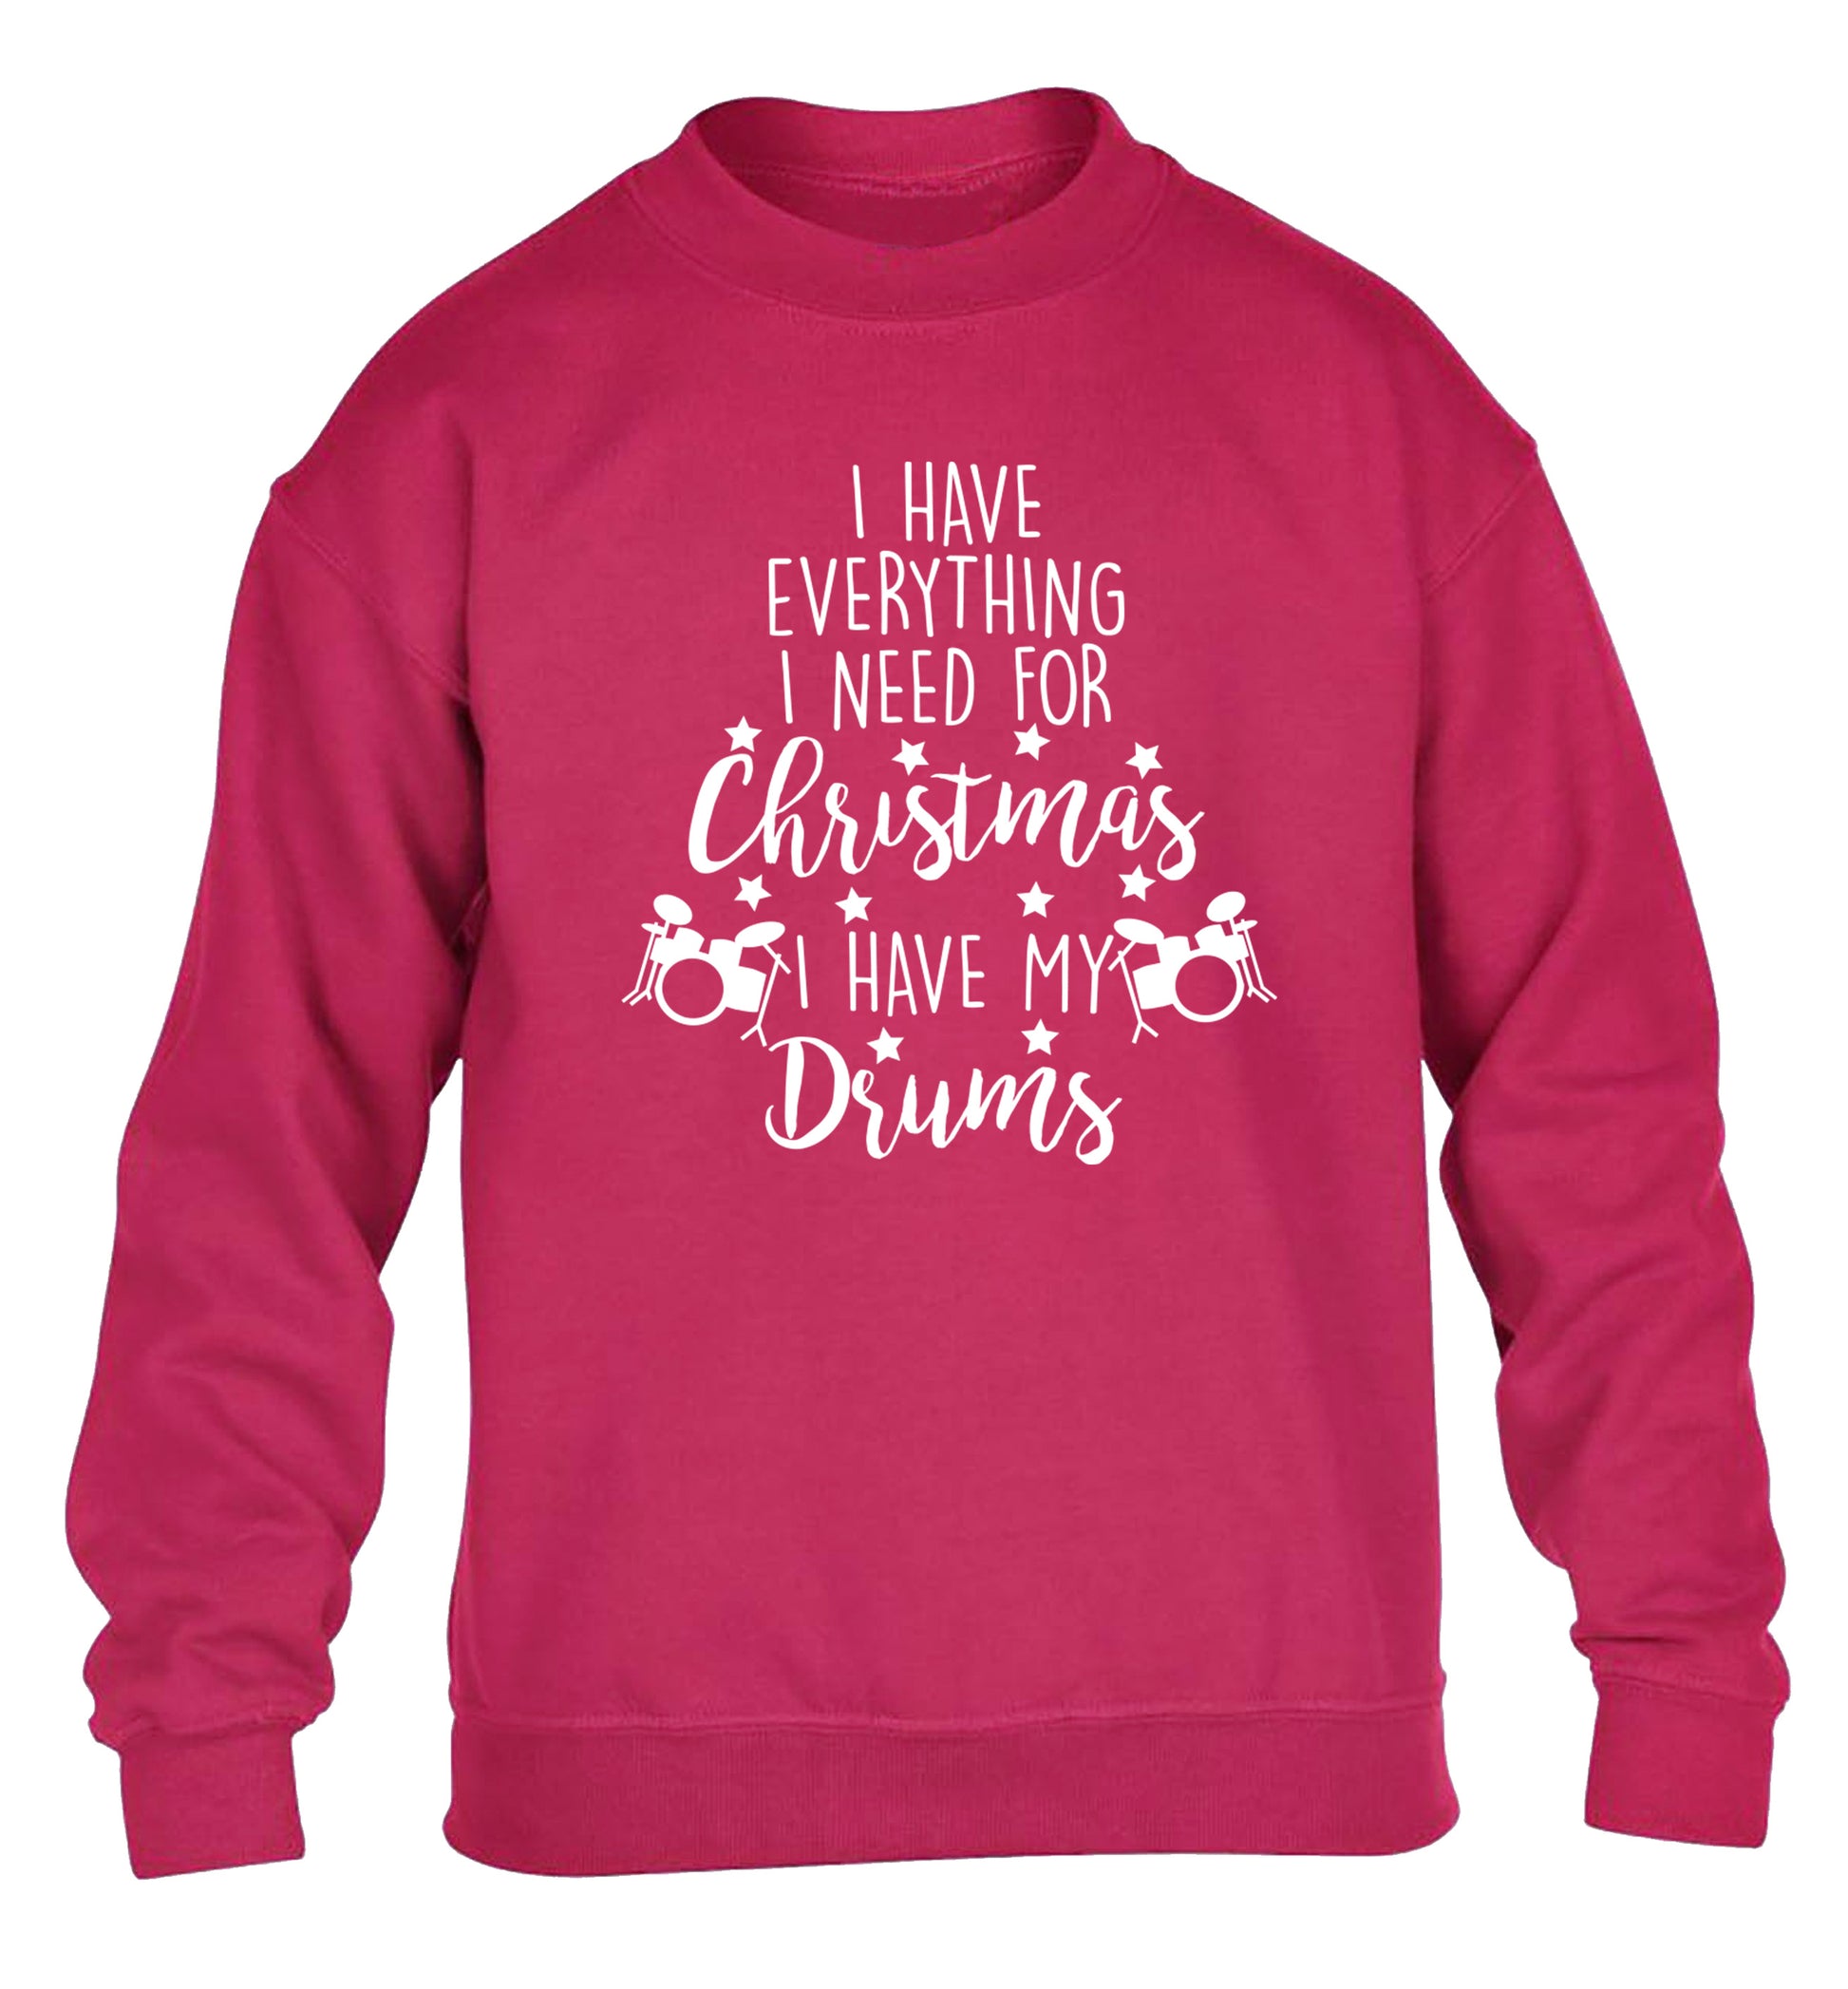 I have everything I need for Christmas I have my drums! children's pink sweater 12-14 Years